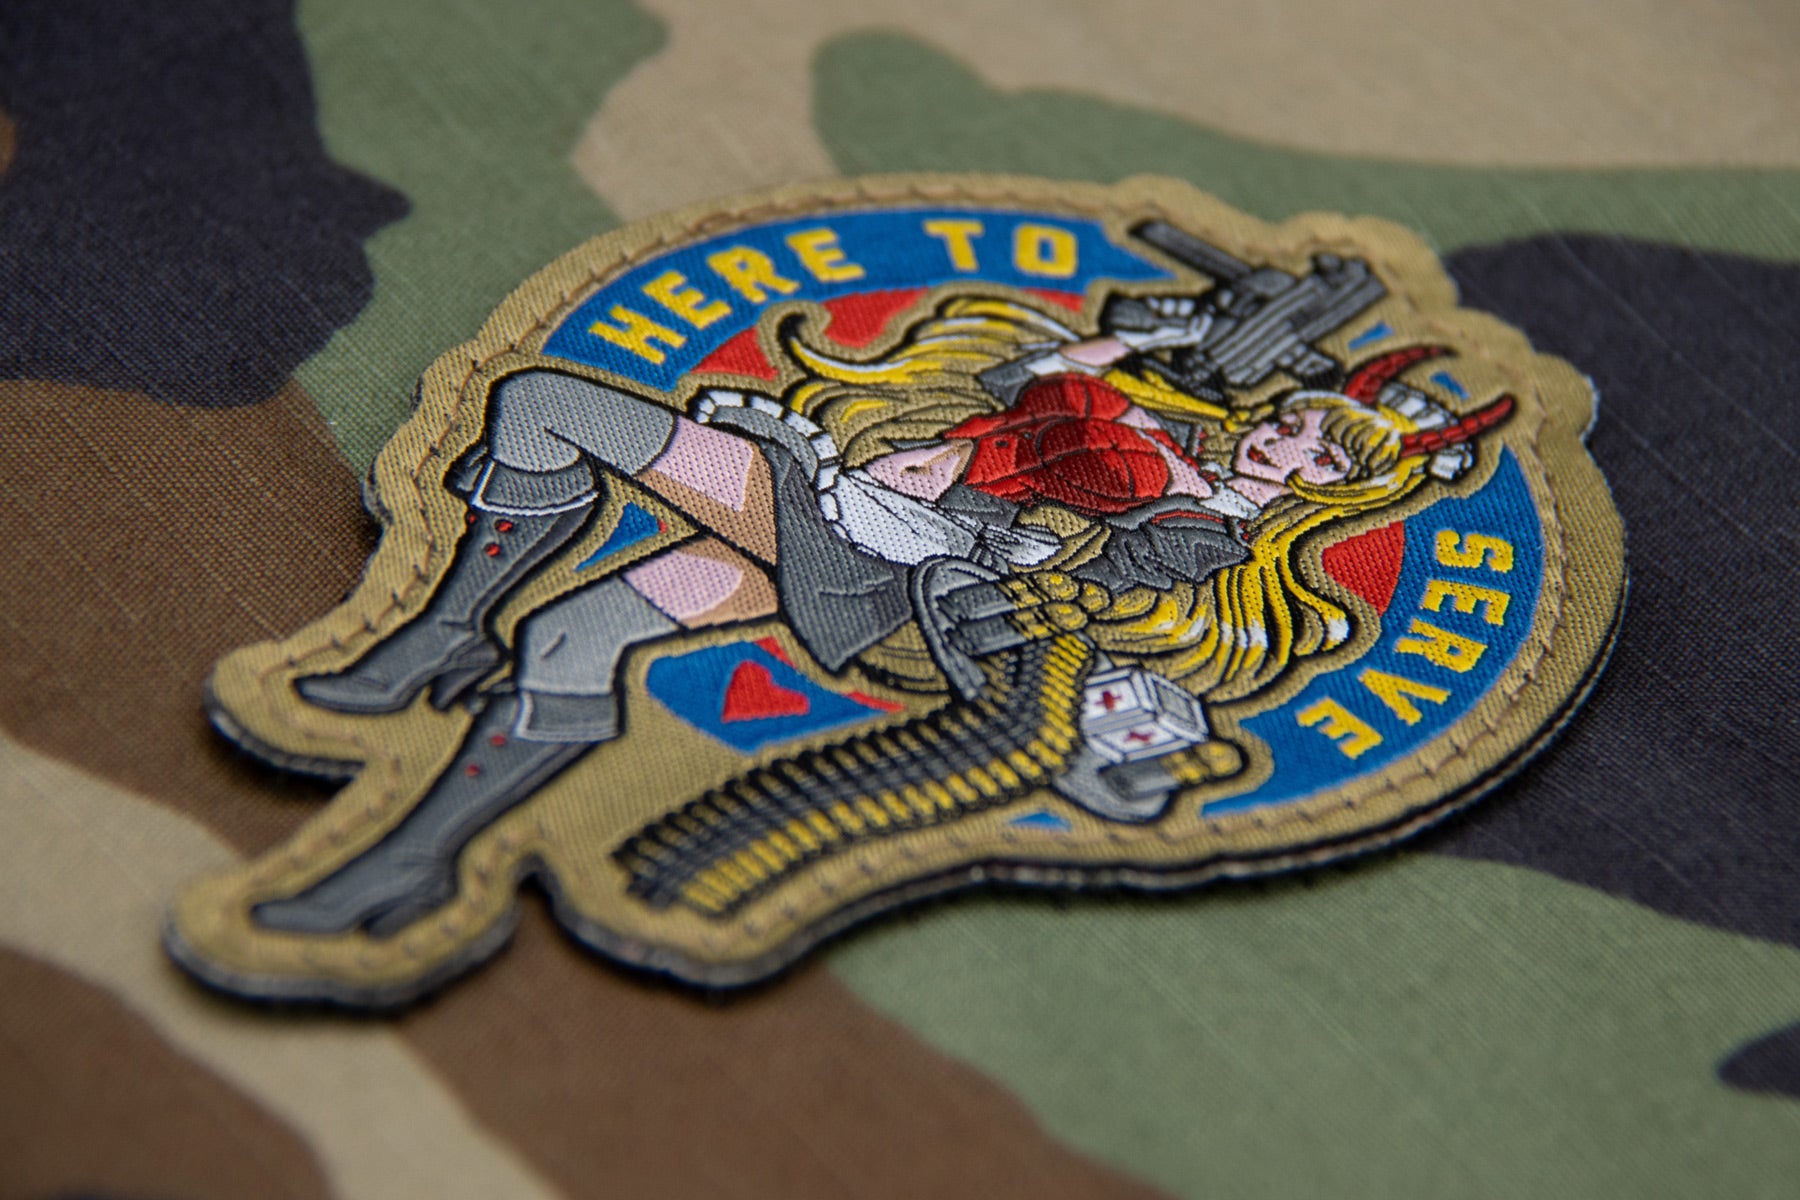 MSM Here to Serve Anime Moral Patch - ssairsoft.com